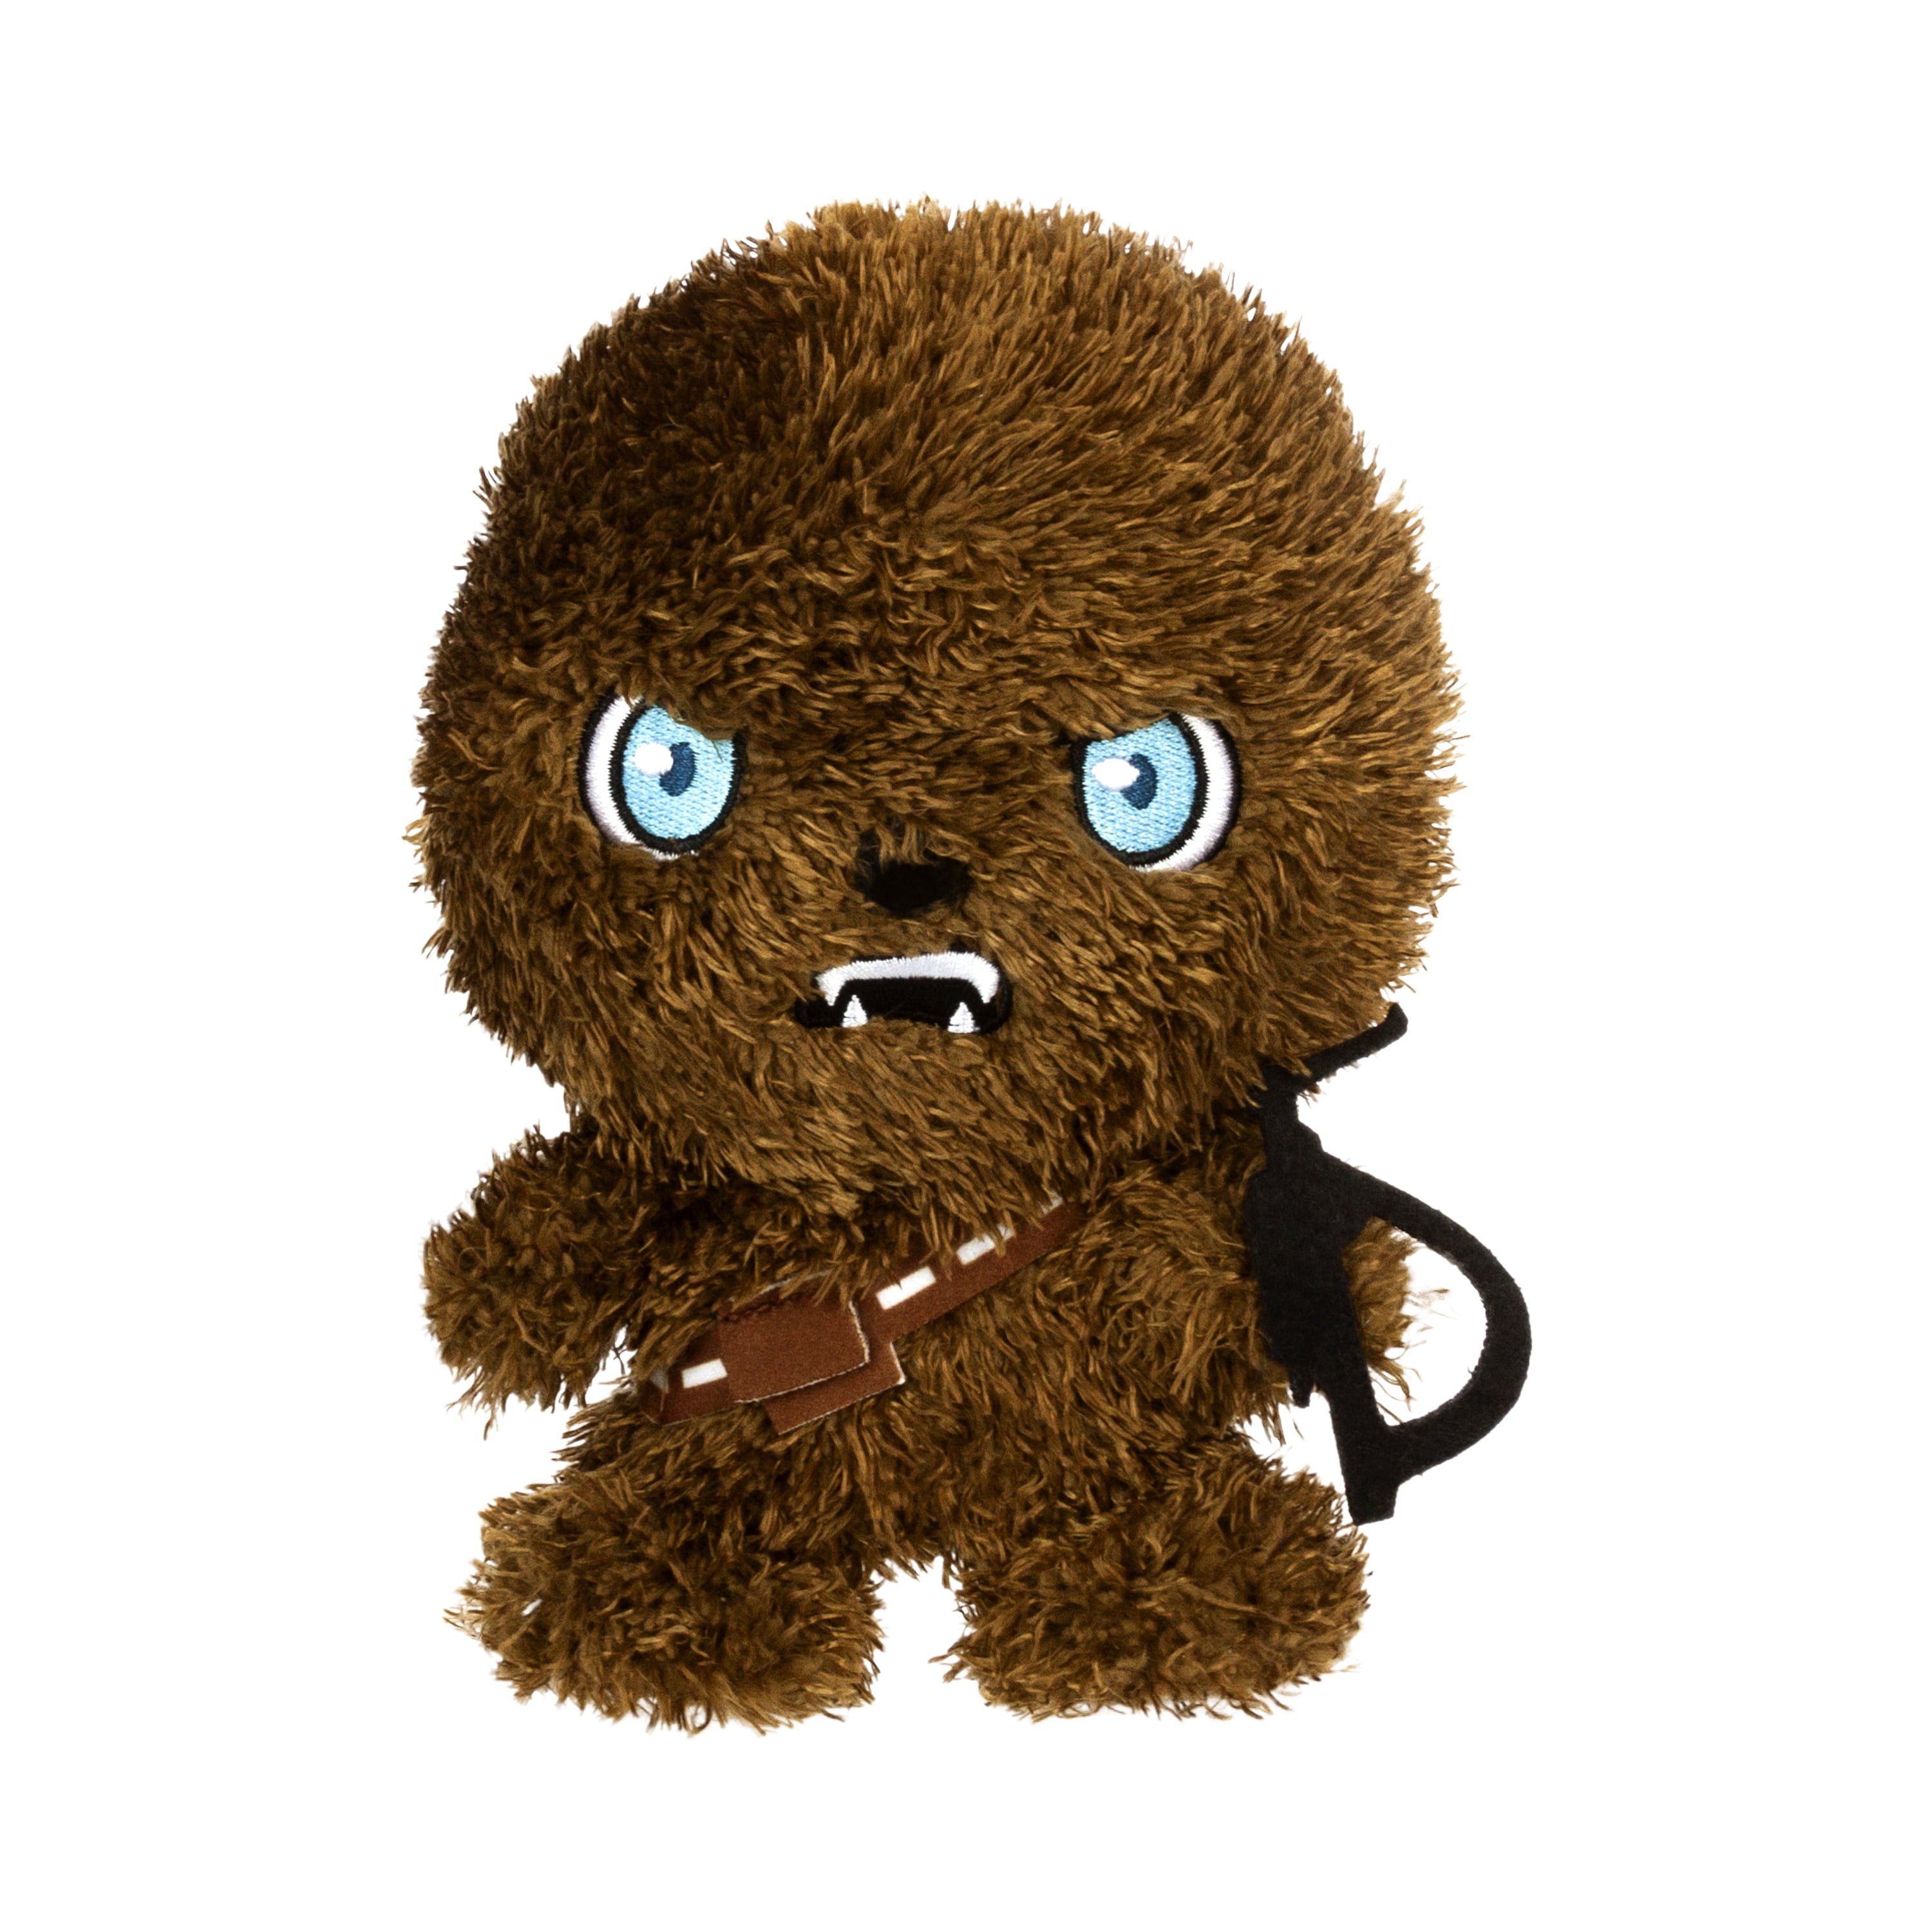 Disney Star Wars The Rise of Skywalker Bump-n-go D-0 D0 Sound Activated Plush for sale online 